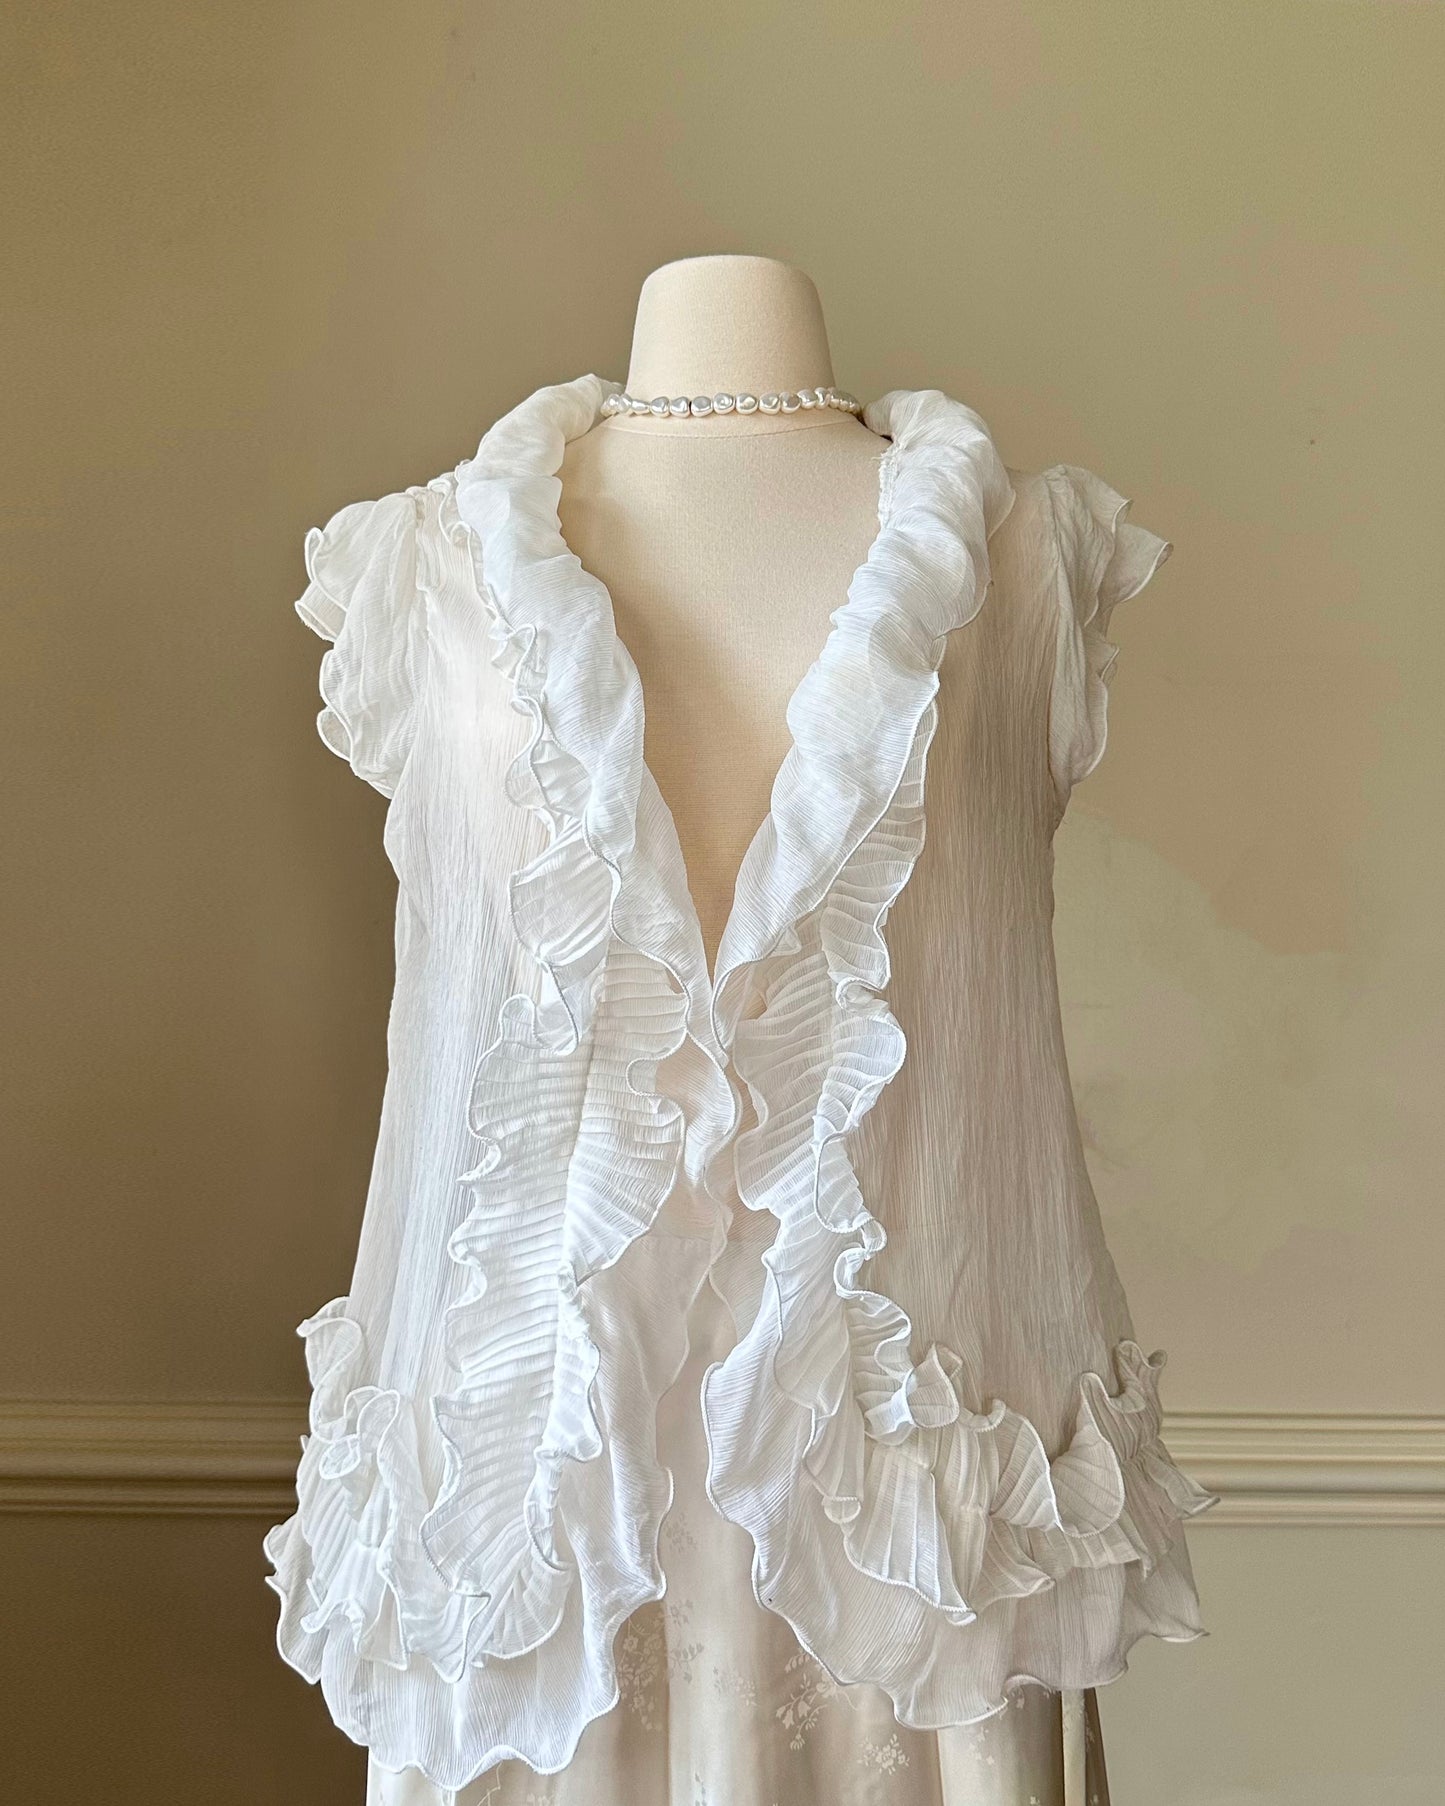 Stunning Rop featuring Layered Ruffled Details with Crinkled Material